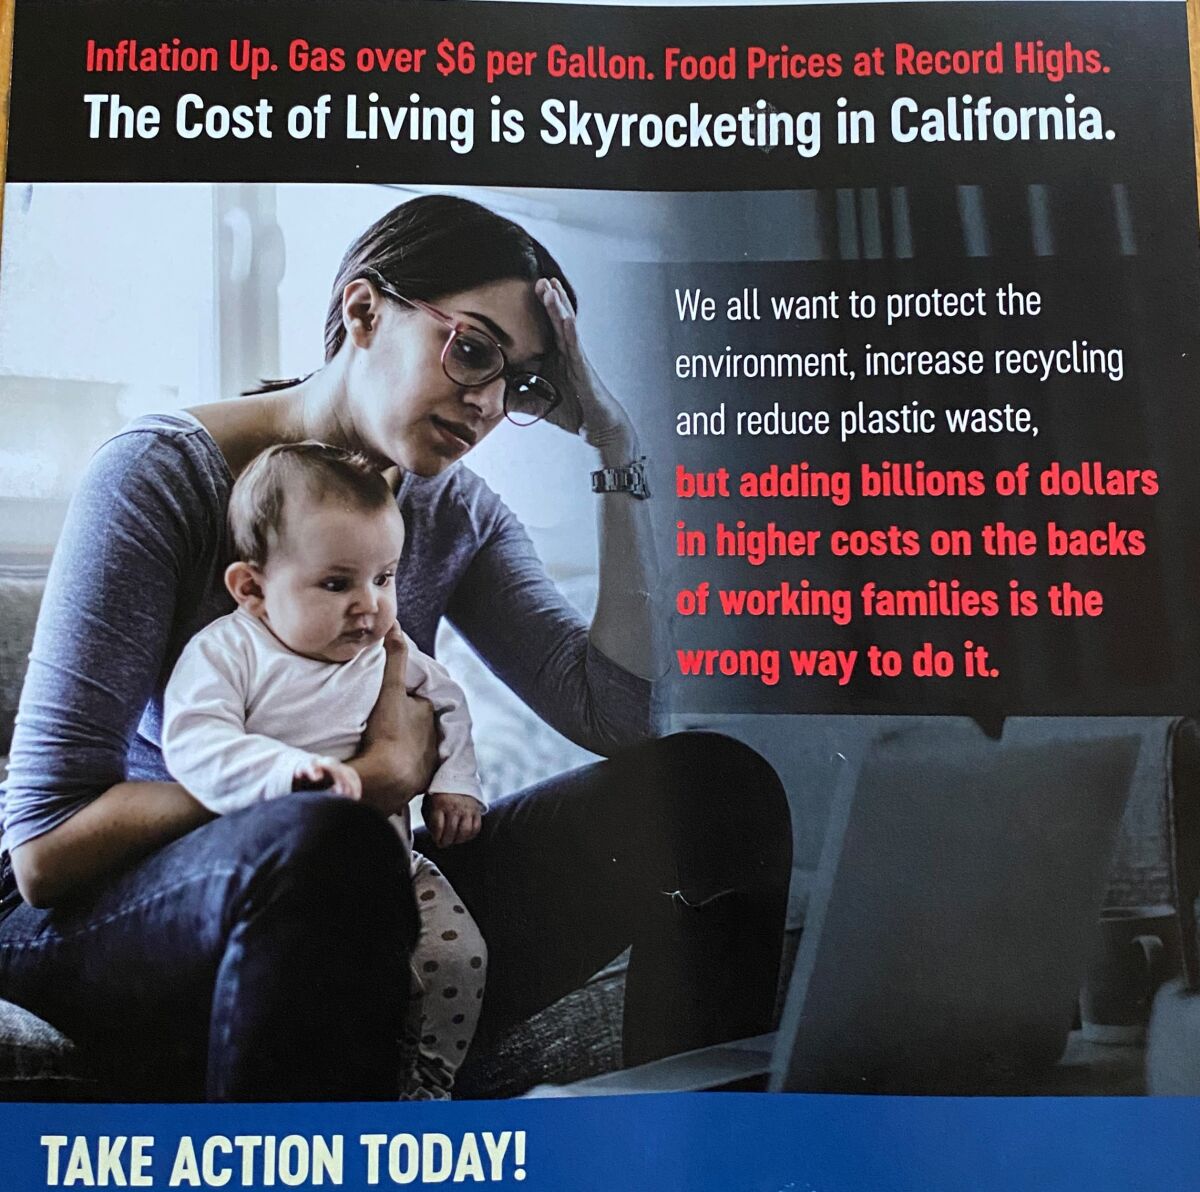 A mailer shows a harried parent with the header "The Cost of Living is Skyrocketing in California."